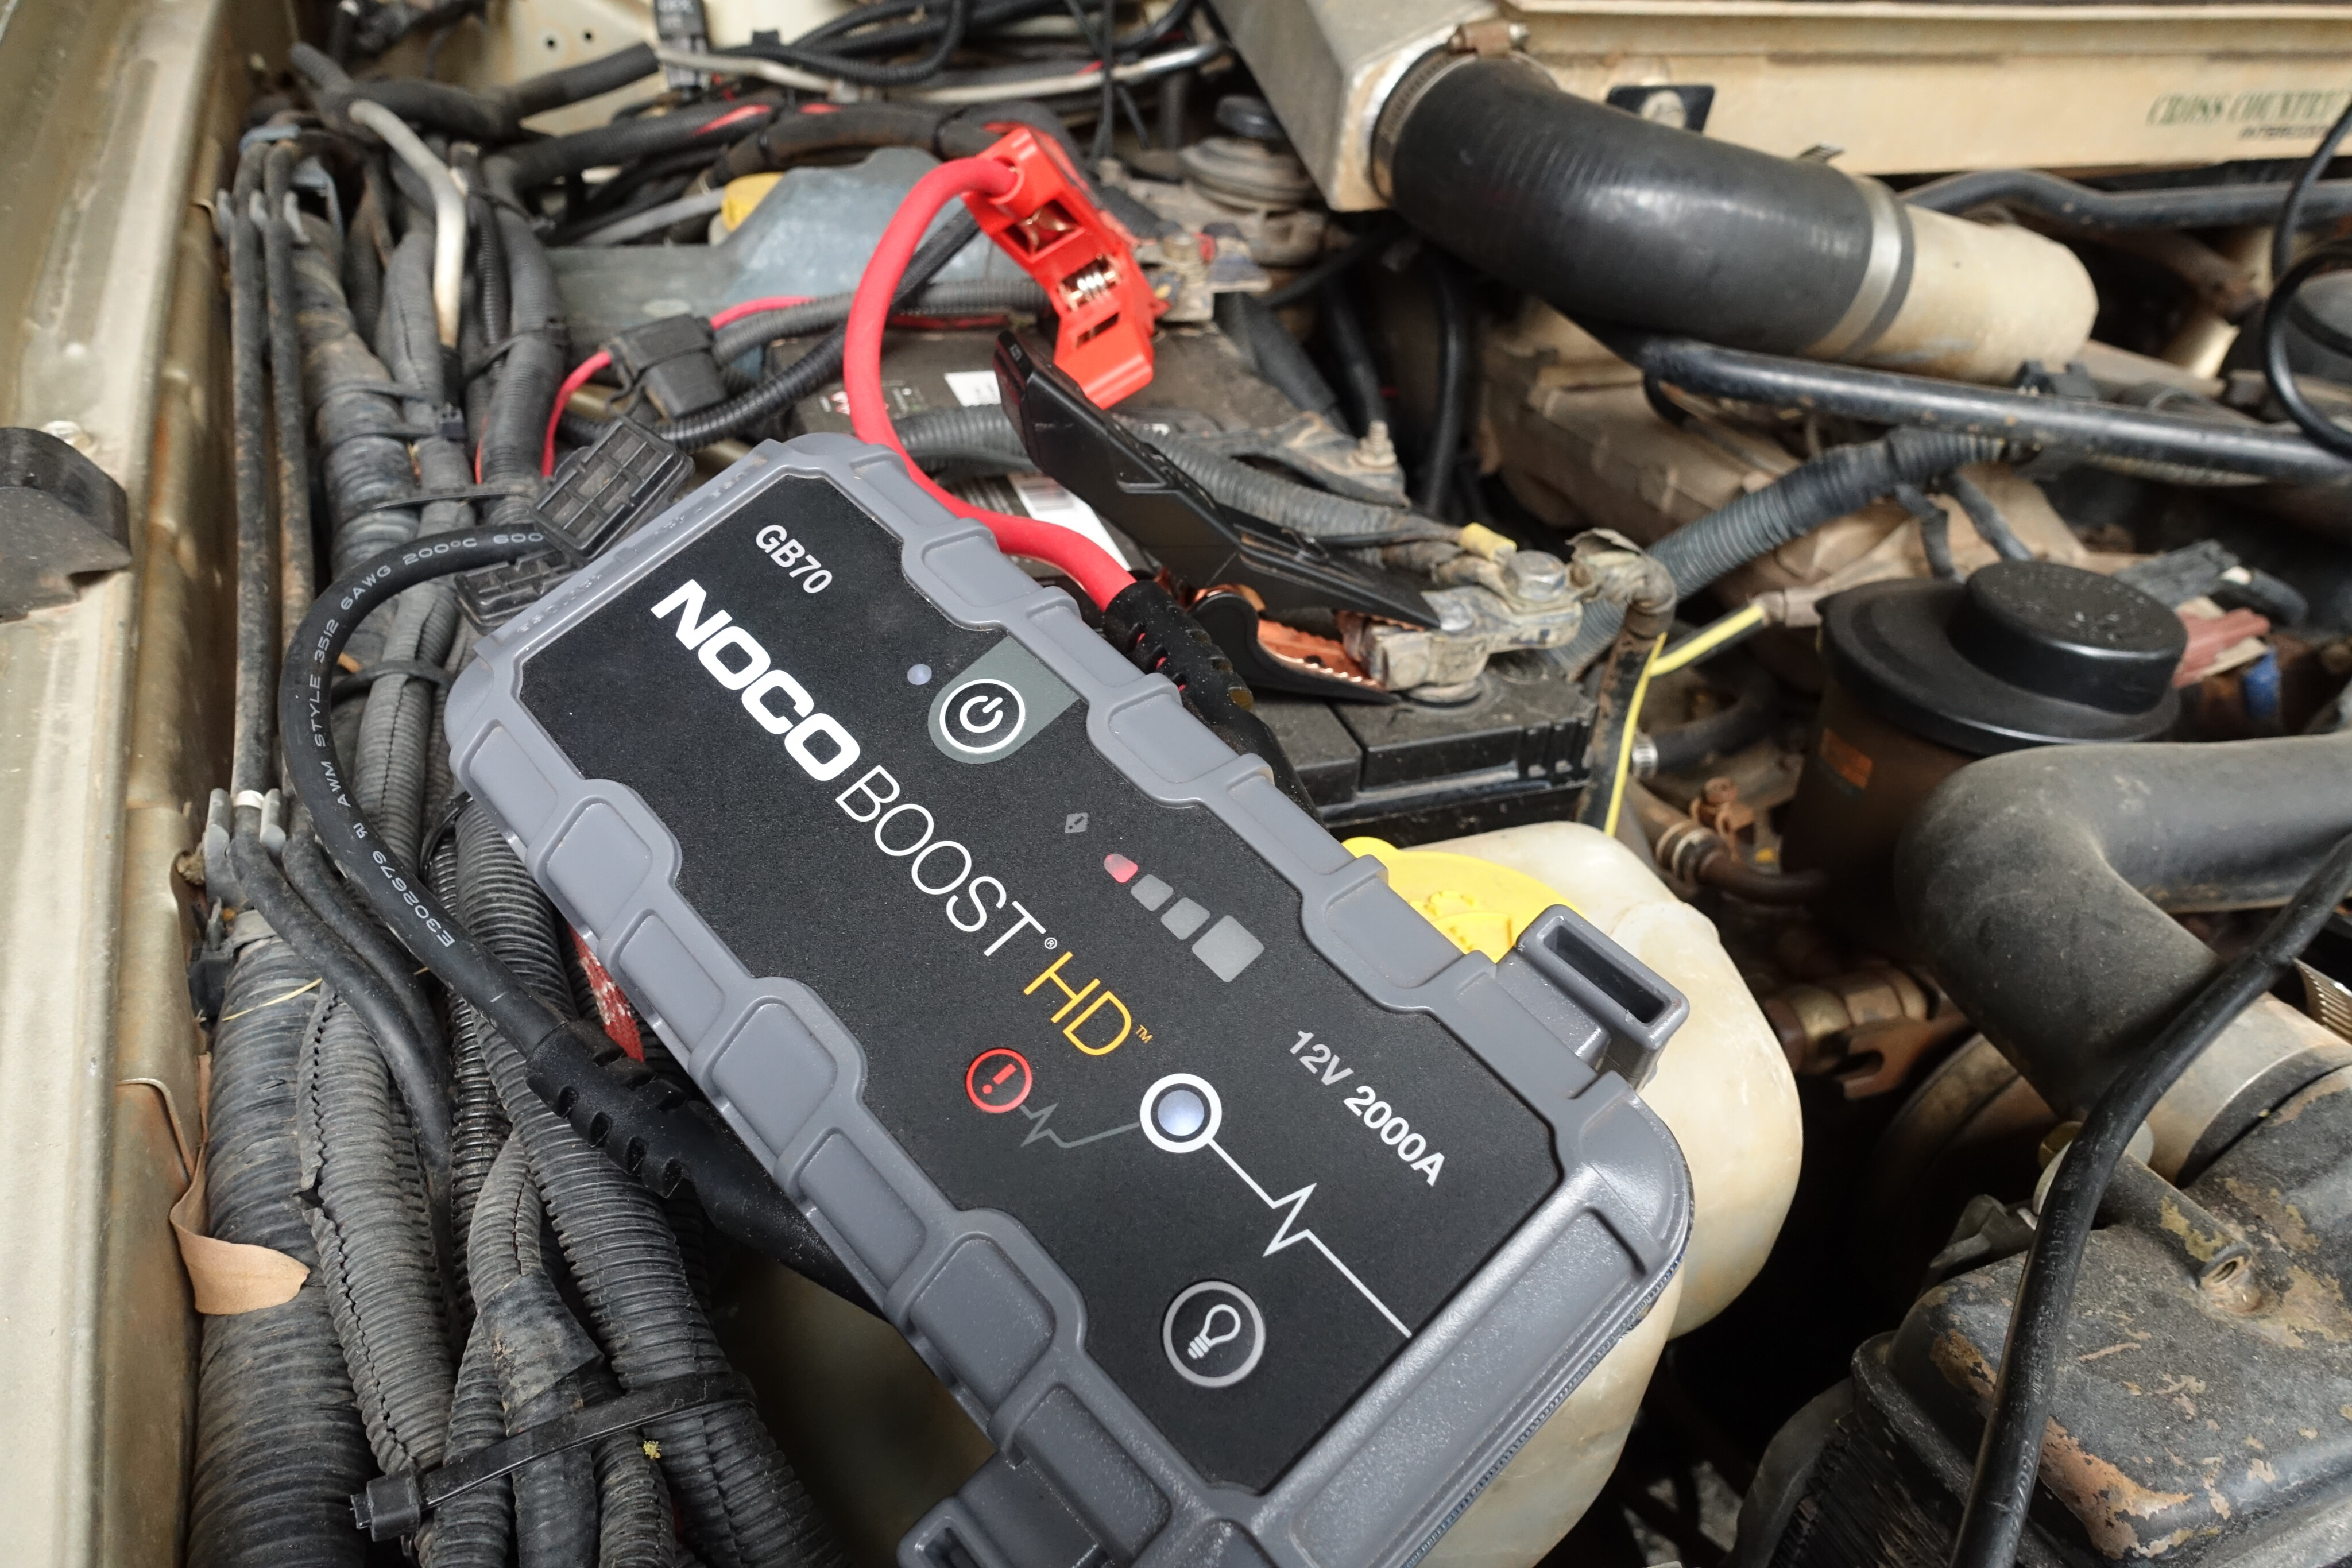 NOCO GB70 Review: The Portable Jump Starter Meant for Big Engines